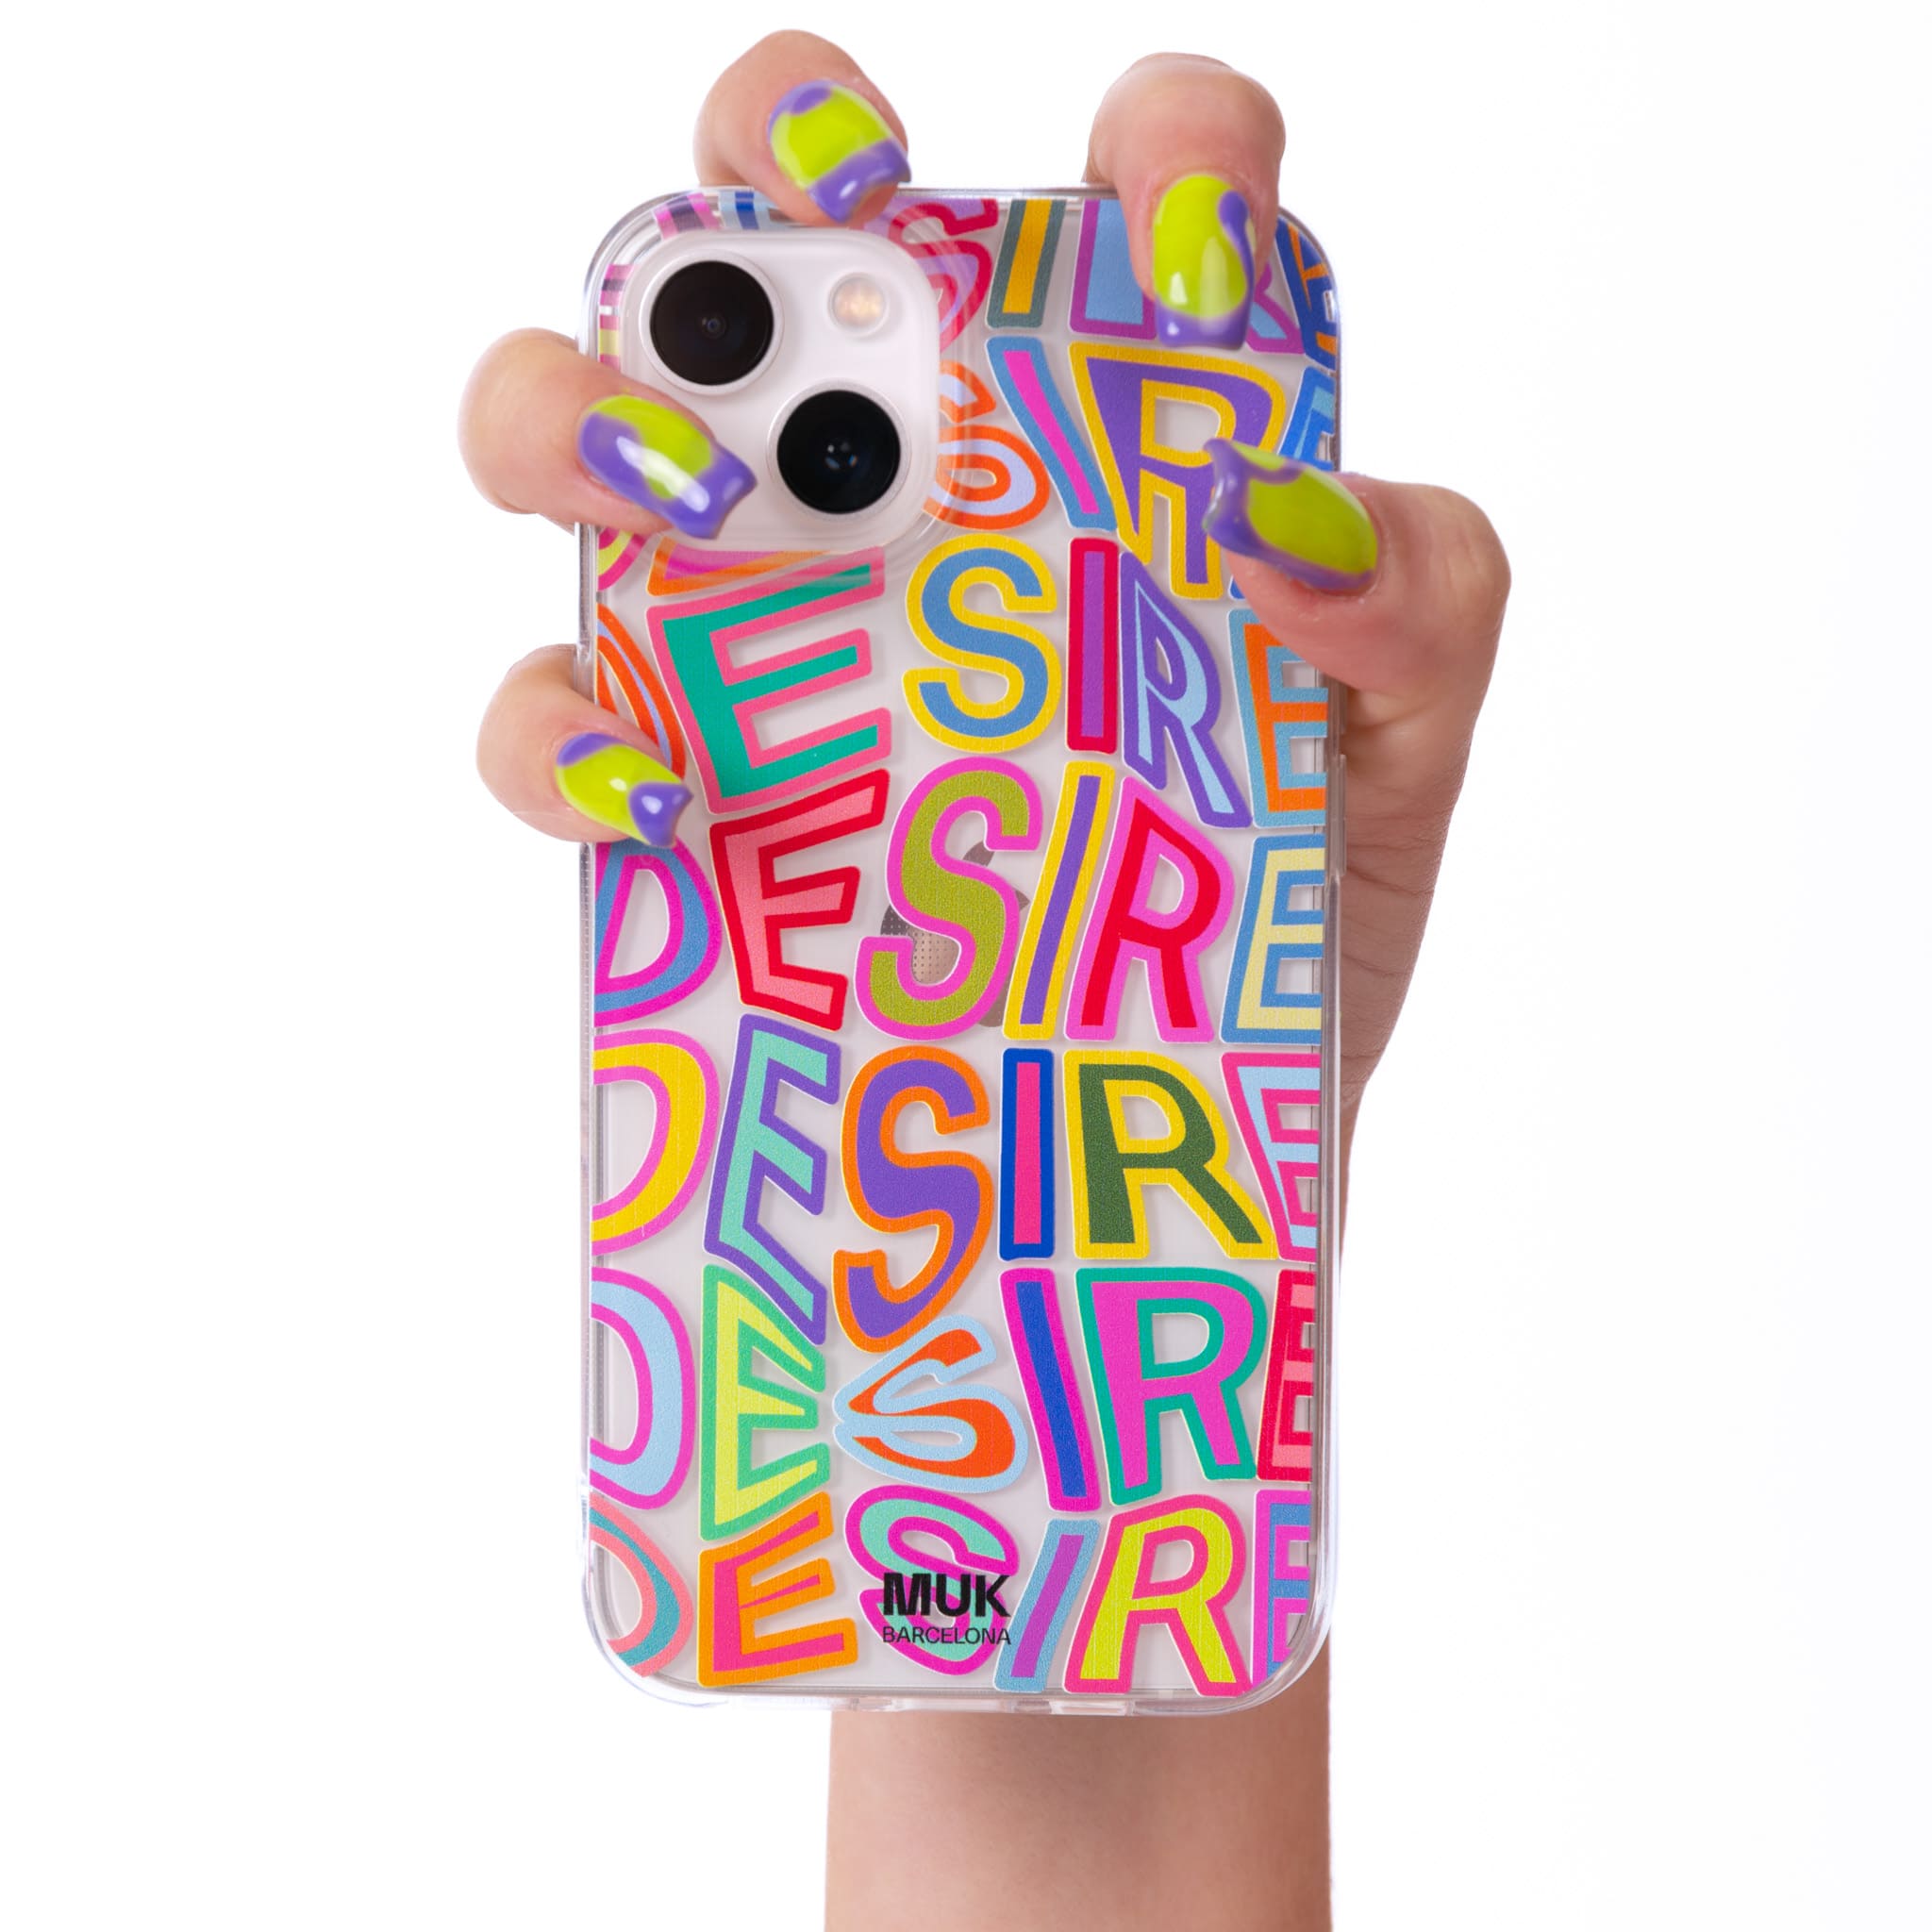 Clear  case phrase Desire distorted colors.
